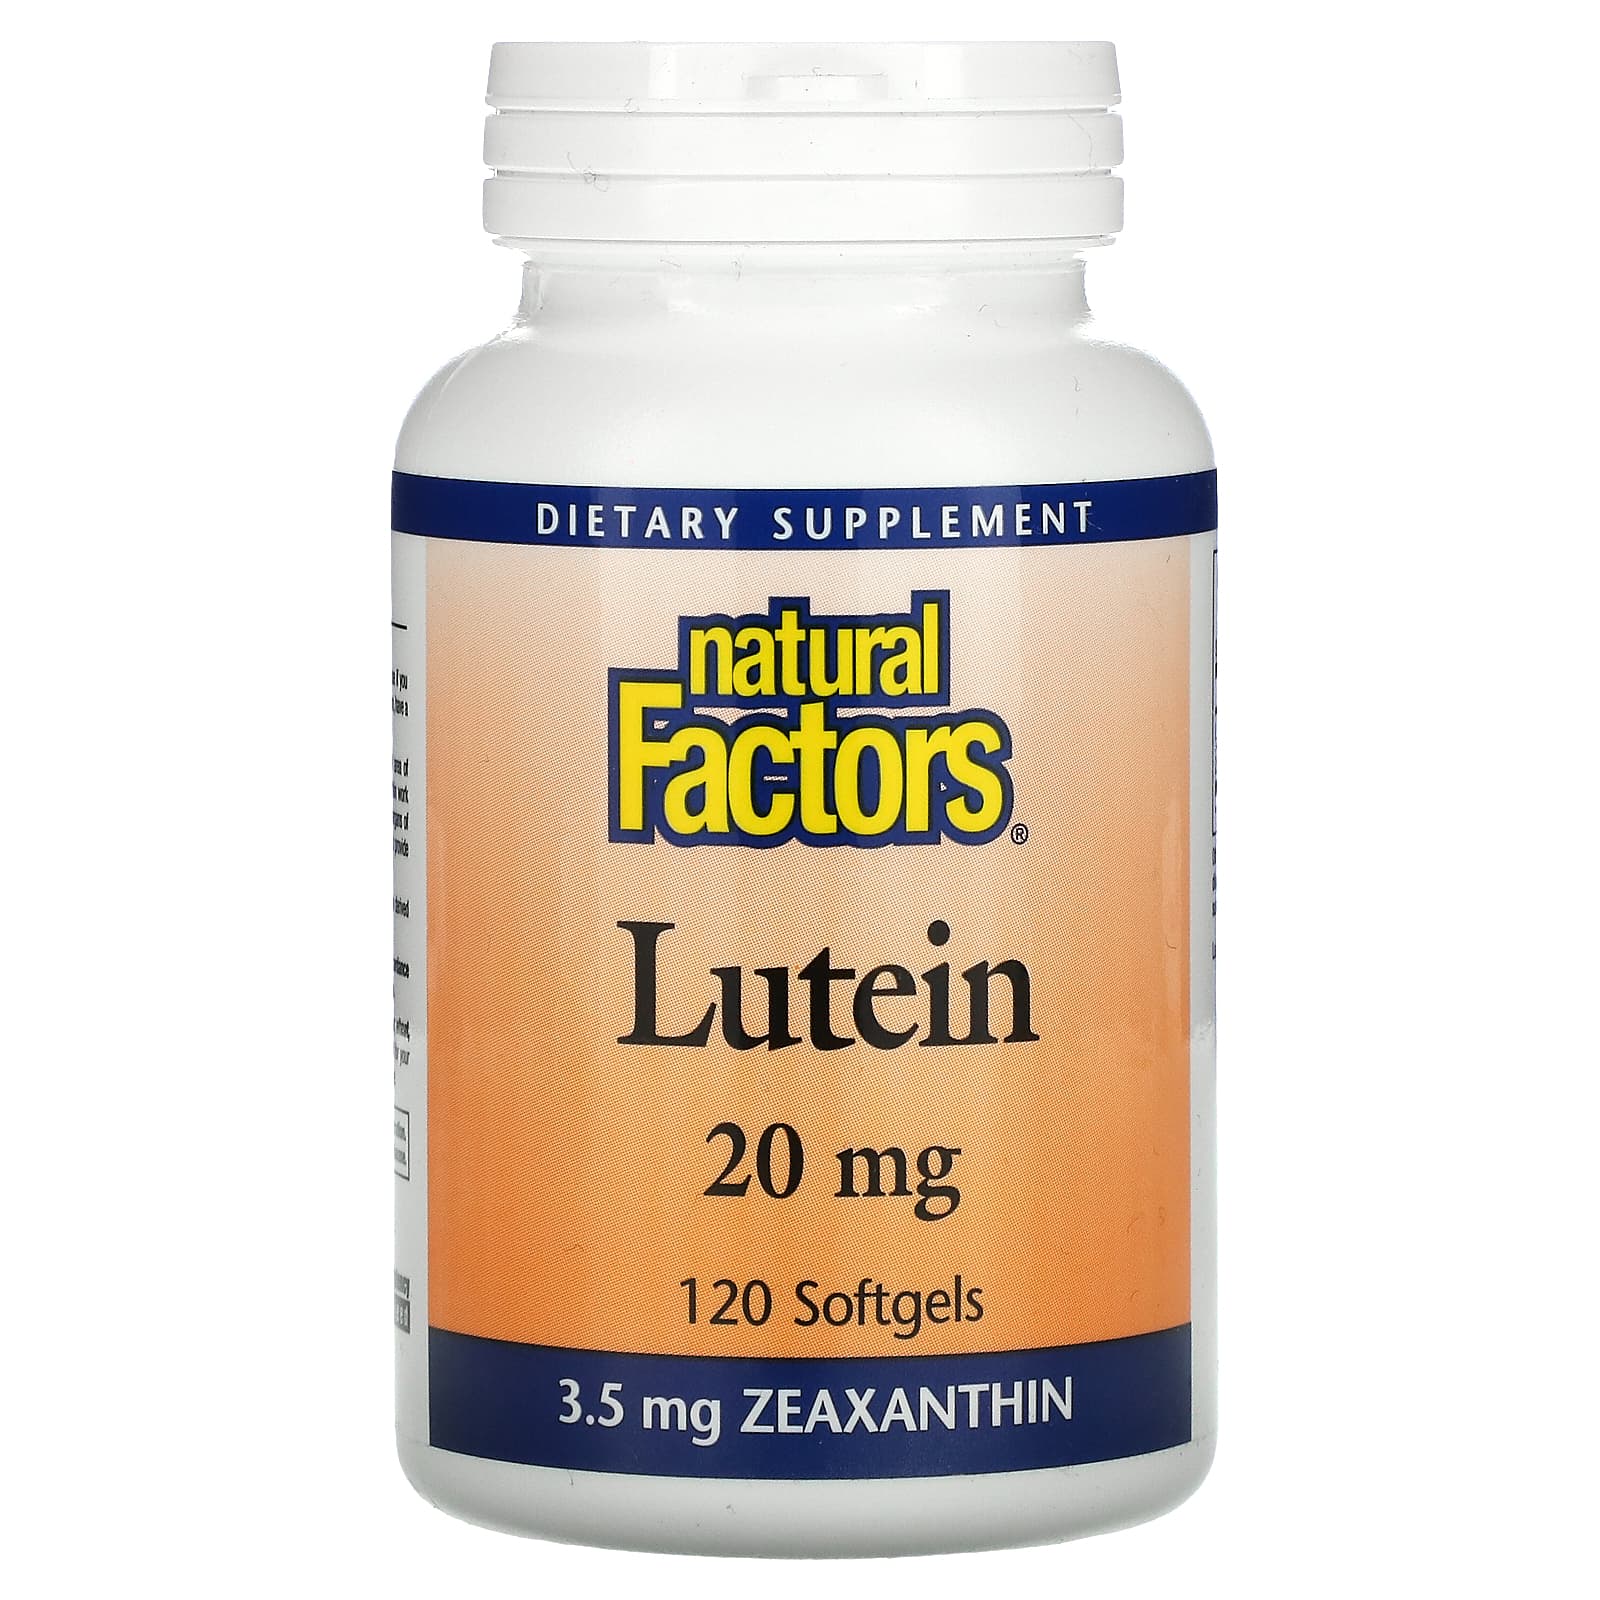 Natural Factors Lutein 20 Mg (with Zeaxanthin 3.5 Mg)